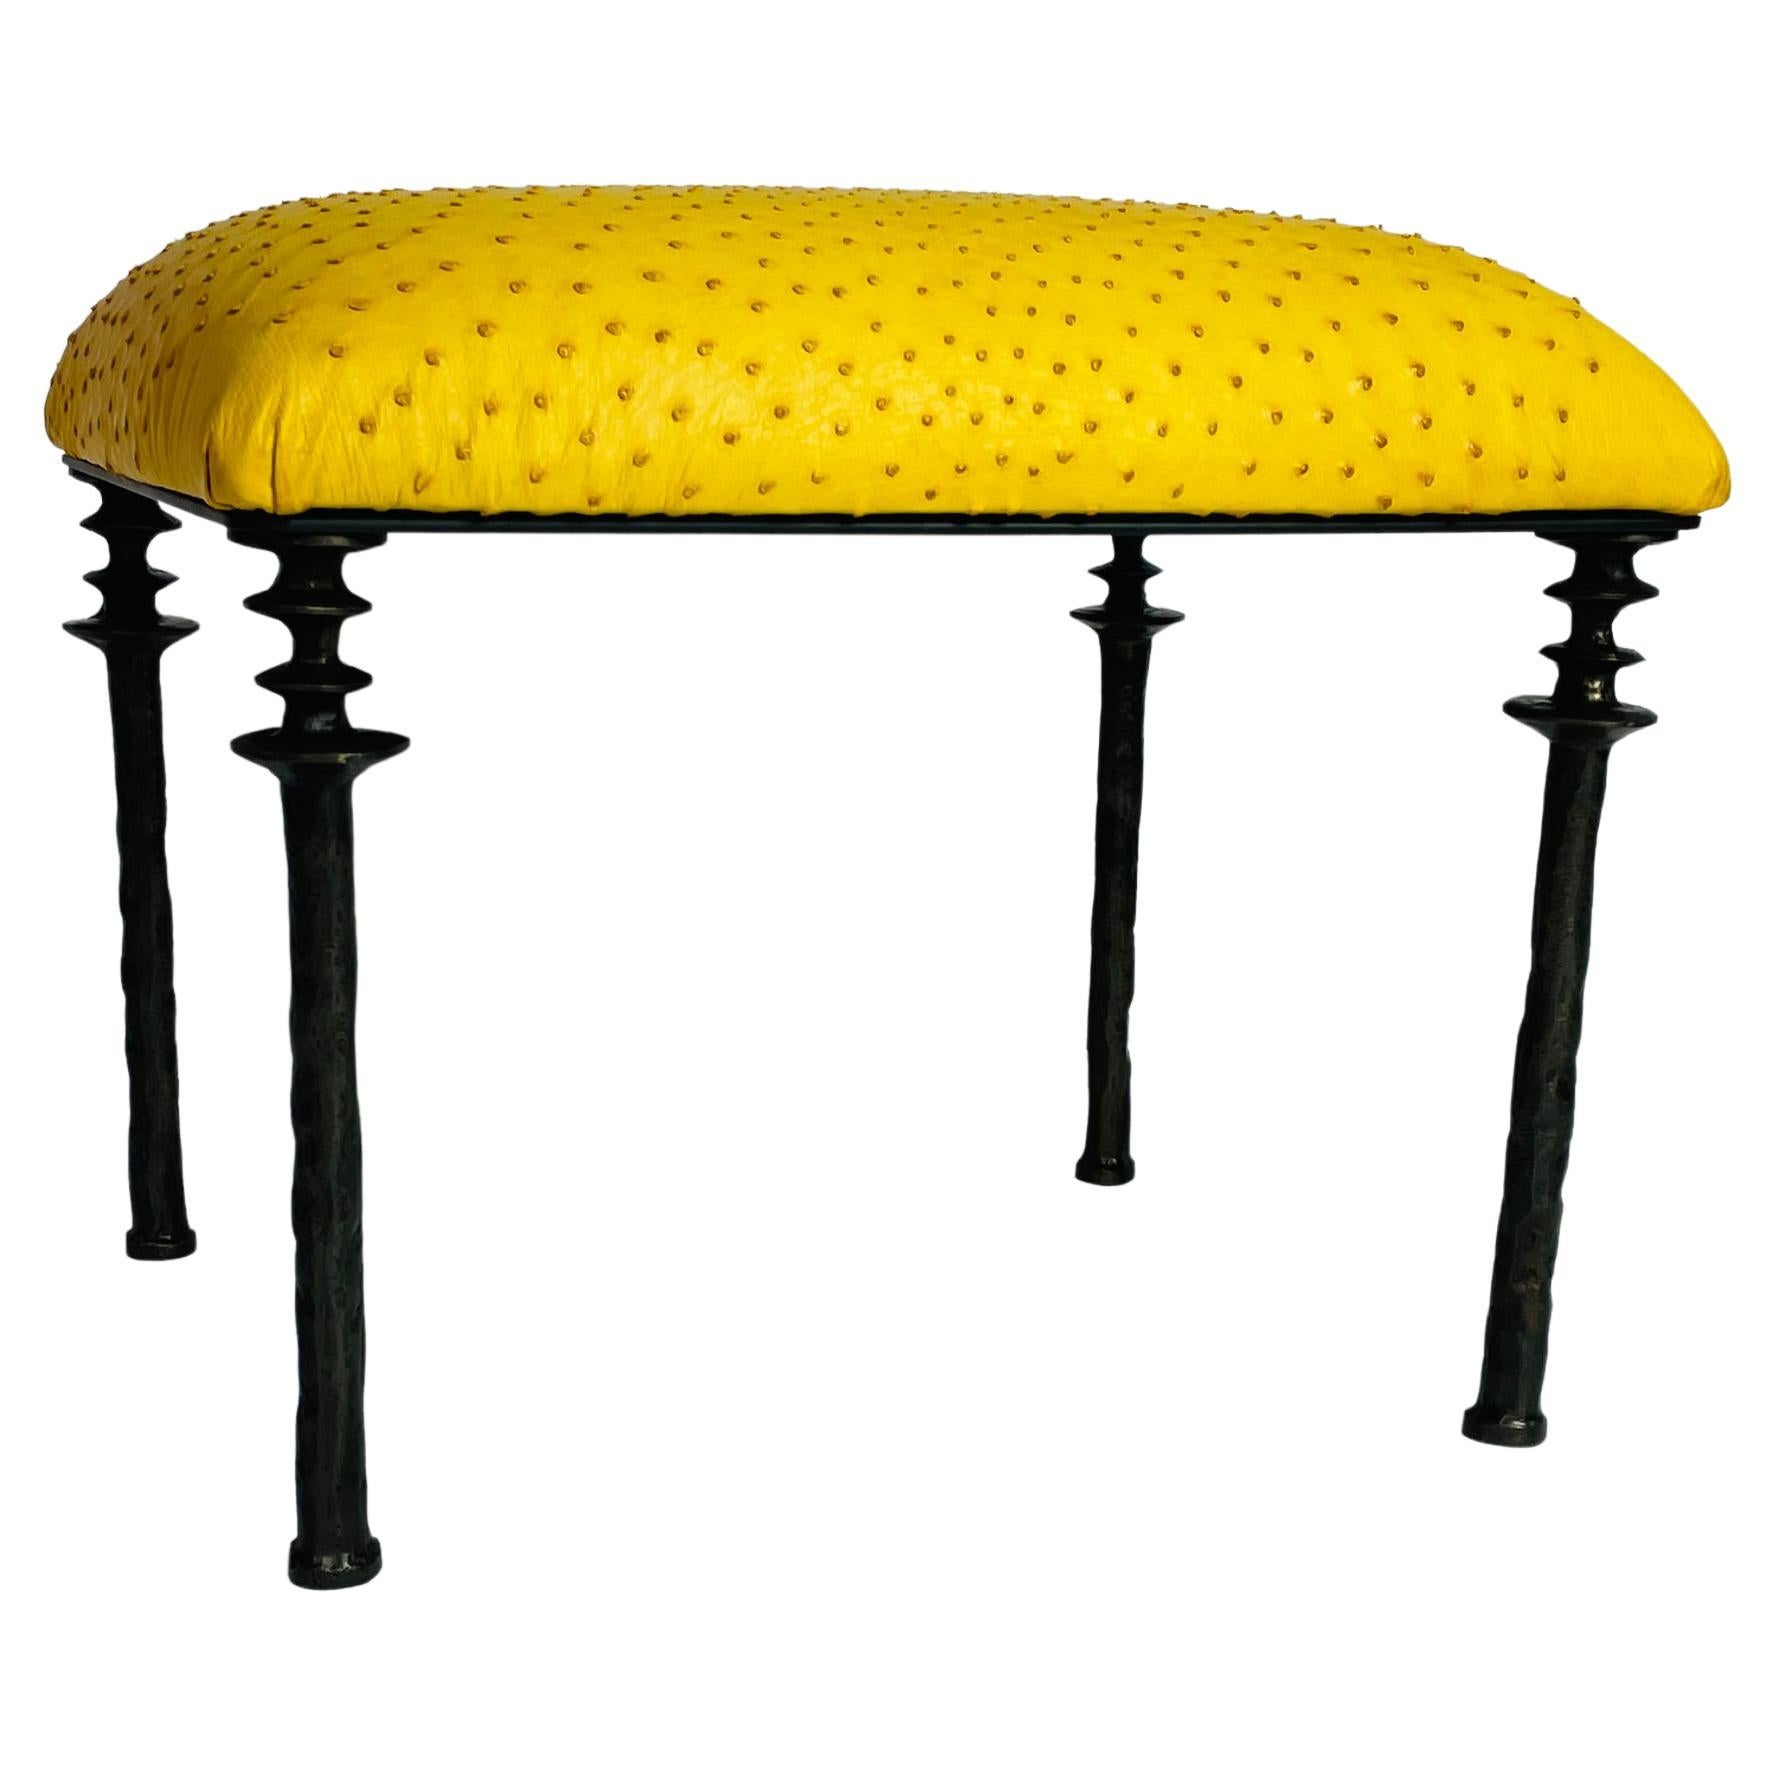 Pair of Sorgue Stools, by Bourgeois Boheme Atelier, Citron Ostrich Leather